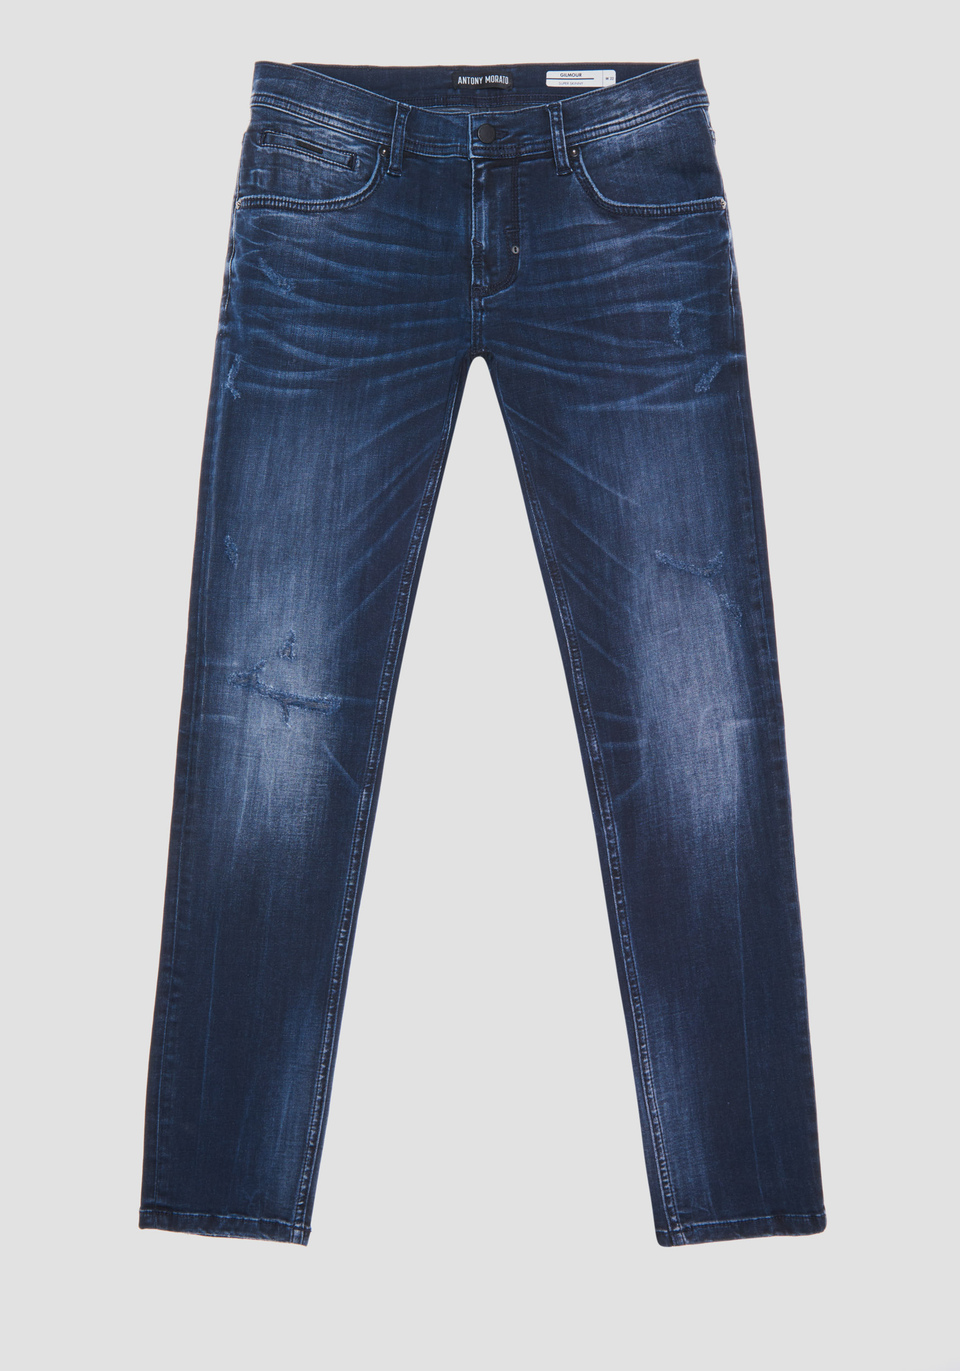 "GILMOUR" SUPER SKINNY FIT JEANS IN STRETCH DENIM BLEND WITH DARK BLEACHED EFFECT WASH - Antony Morato Online Shop